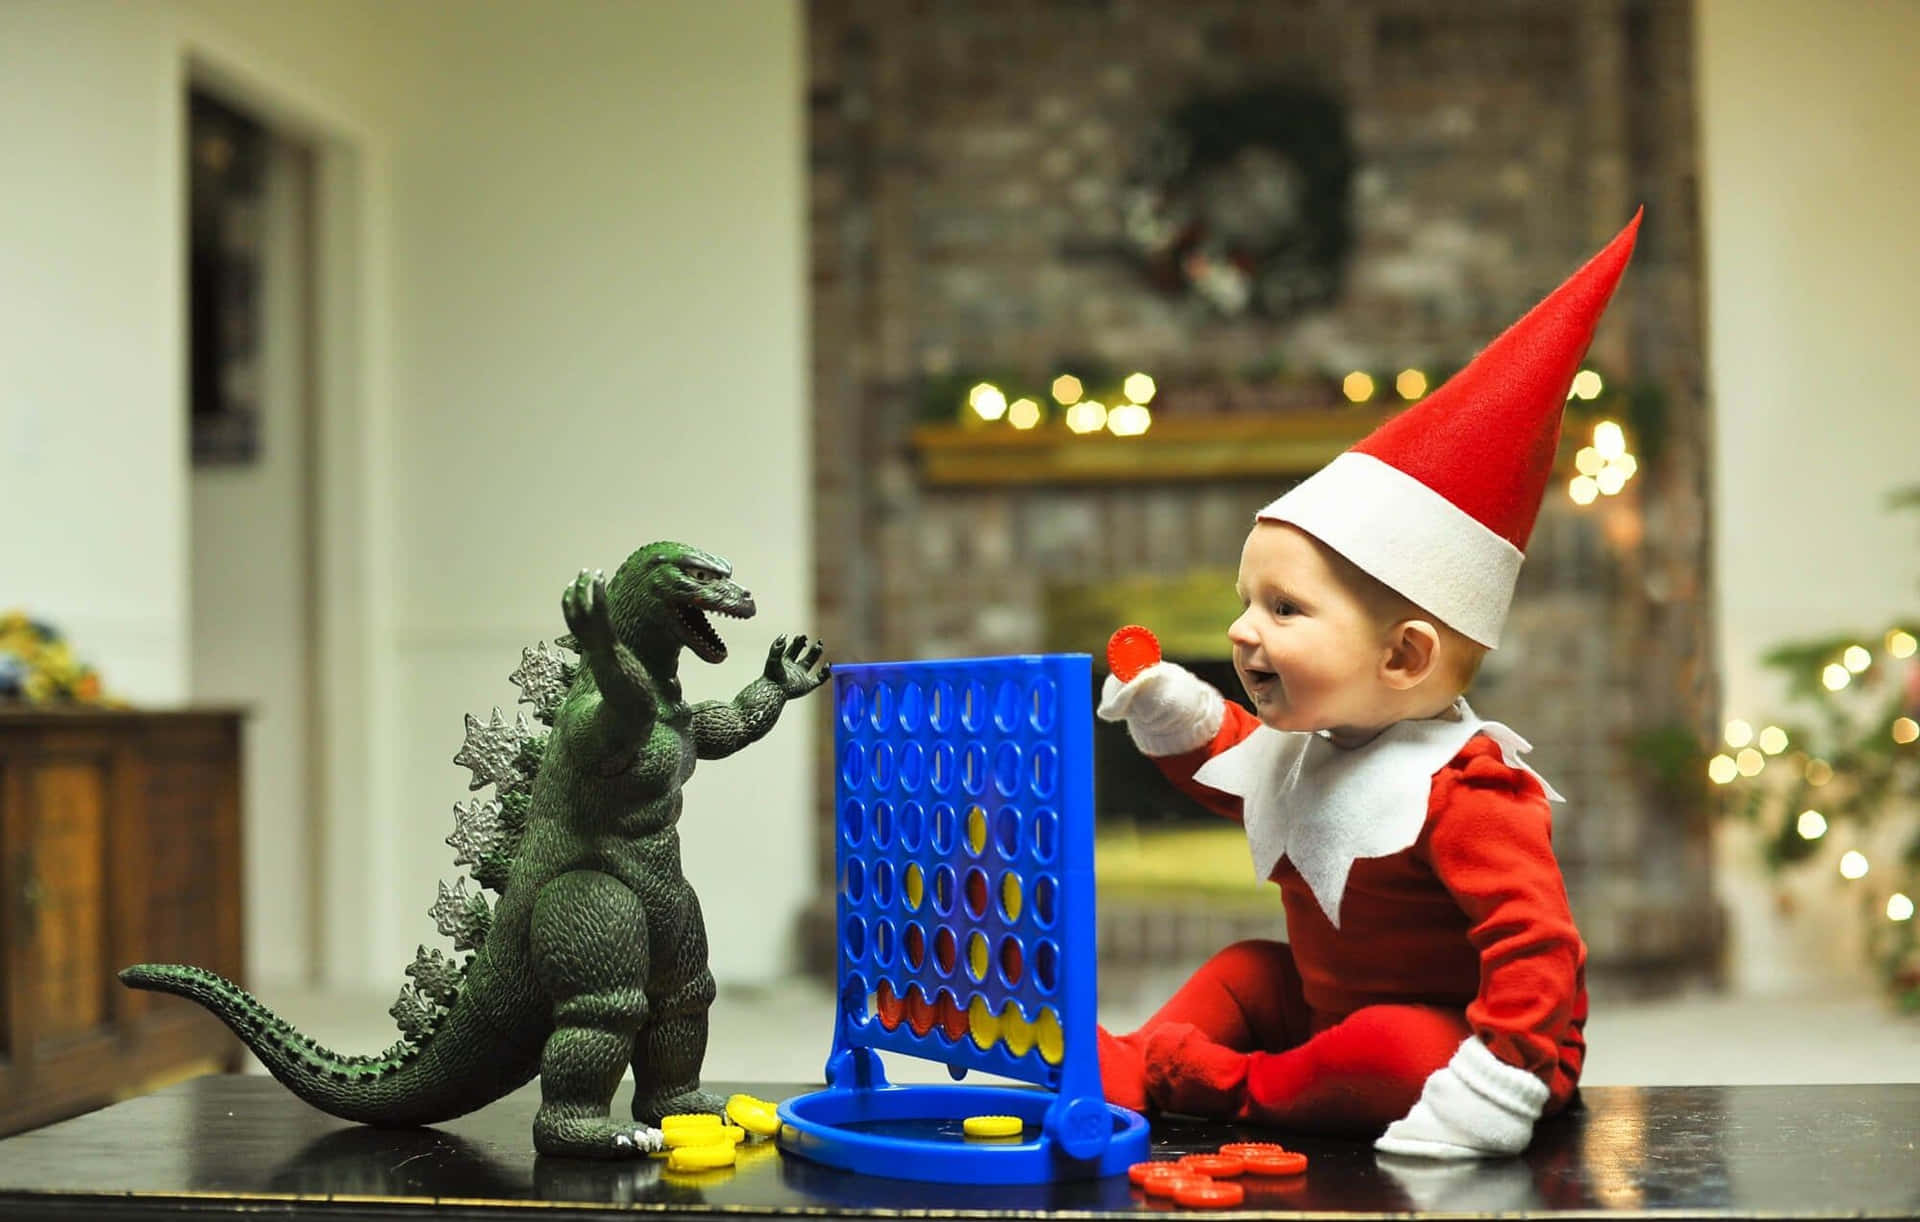 A Baby Dressed As An Elf Plays With A Toy Godzilla